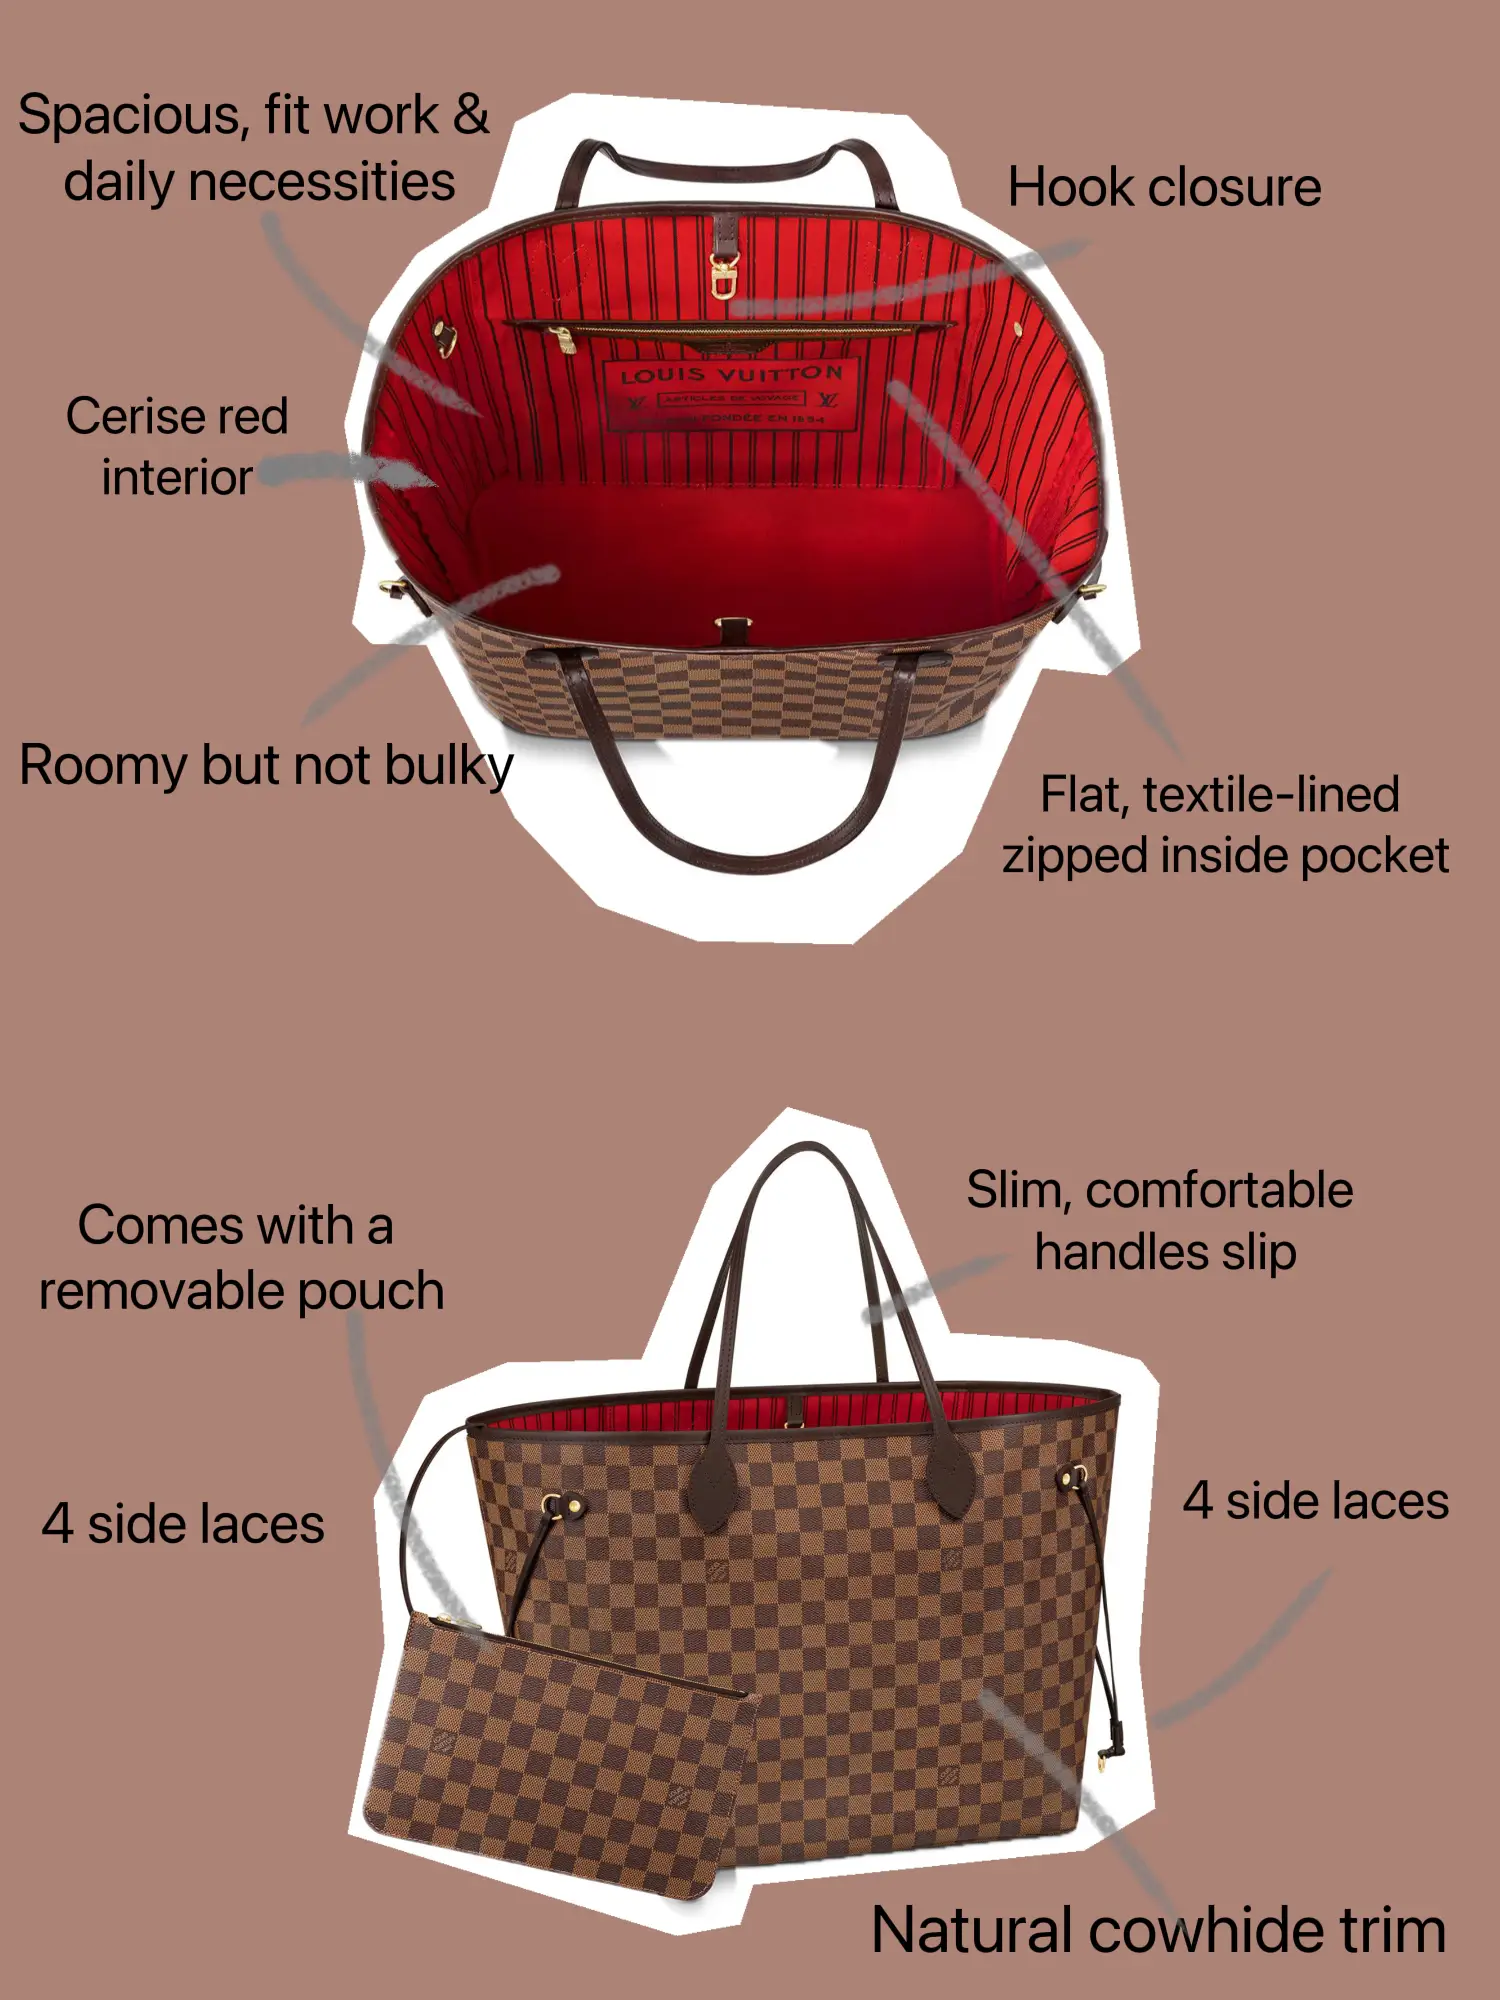 THE ICONIC LOUIS VUITTON NEVERFULL BAG